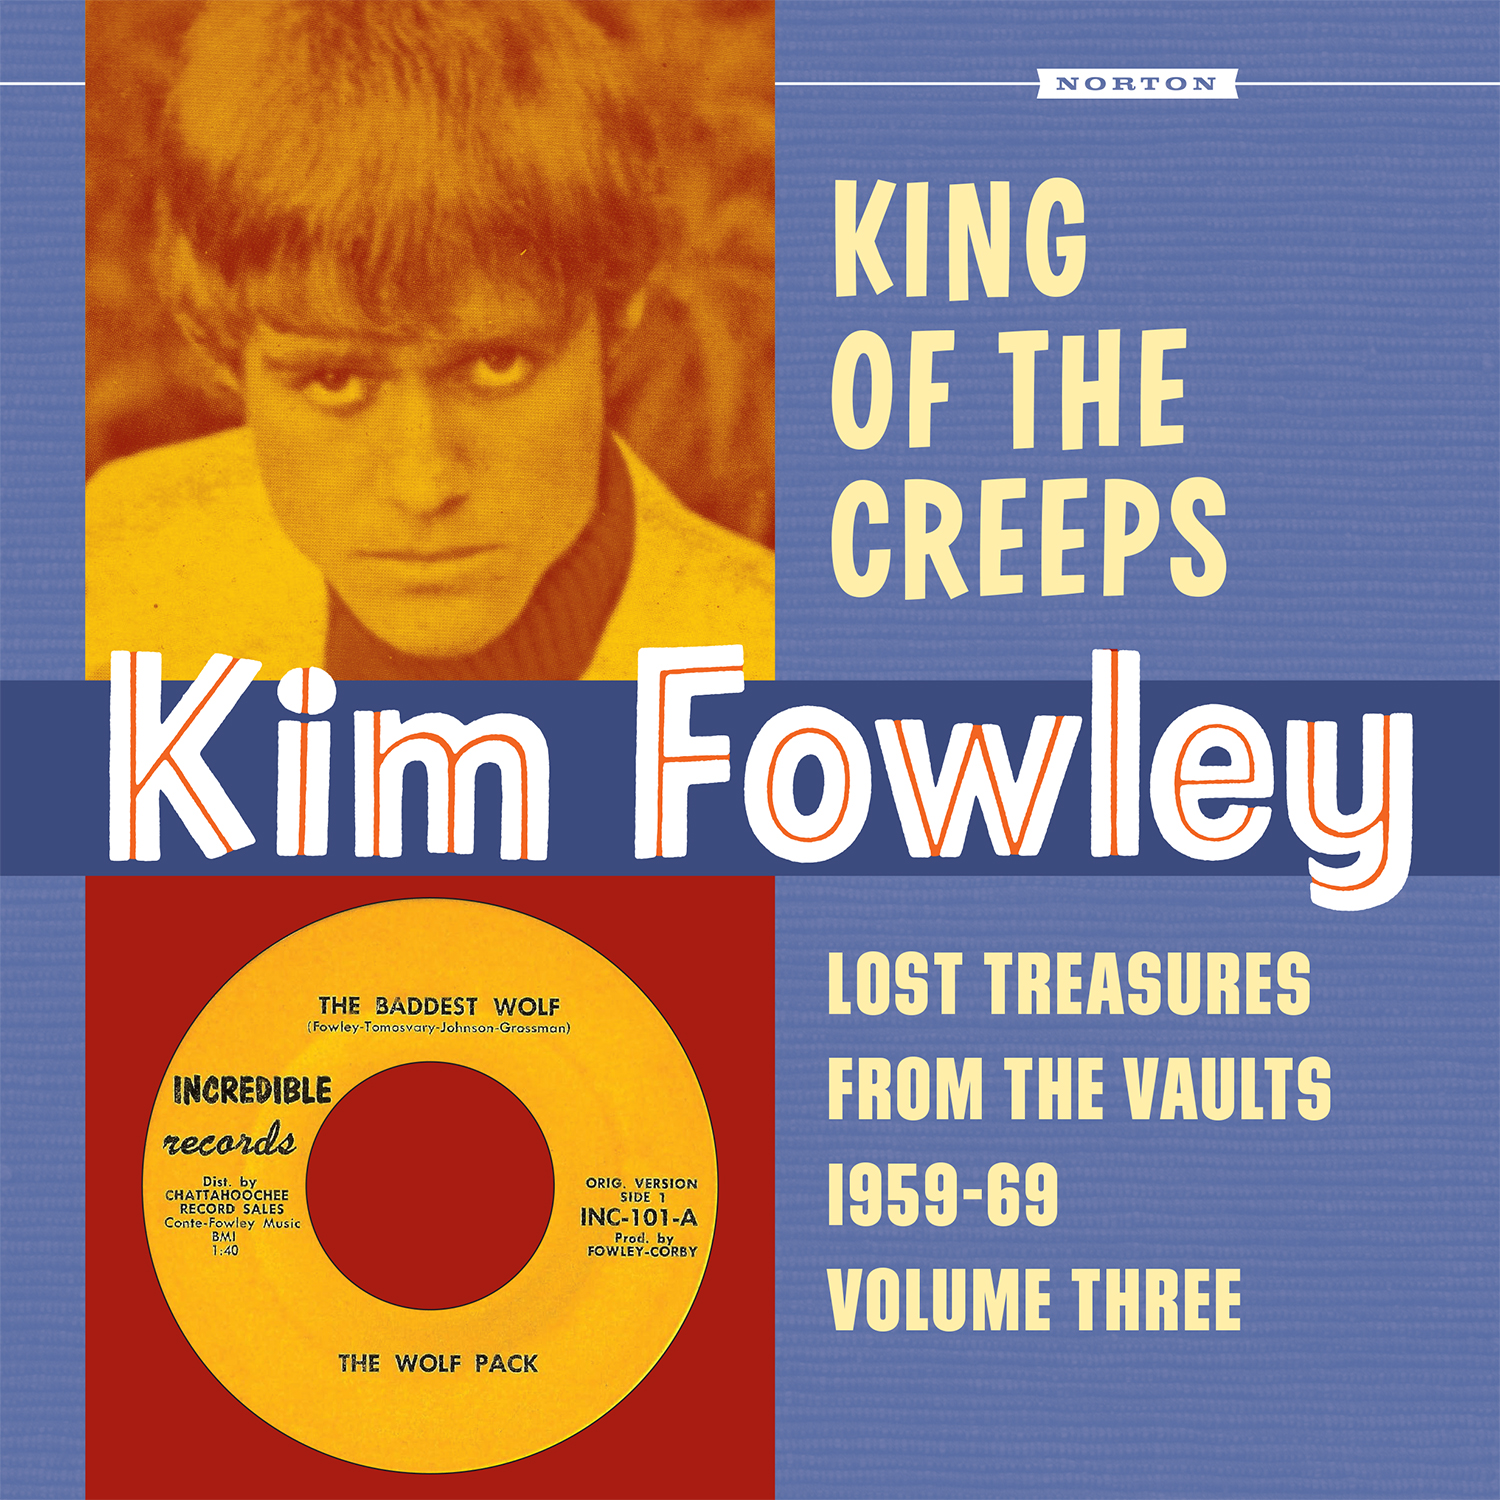 Kim Fowley - King of the Creeps LP/CD cover